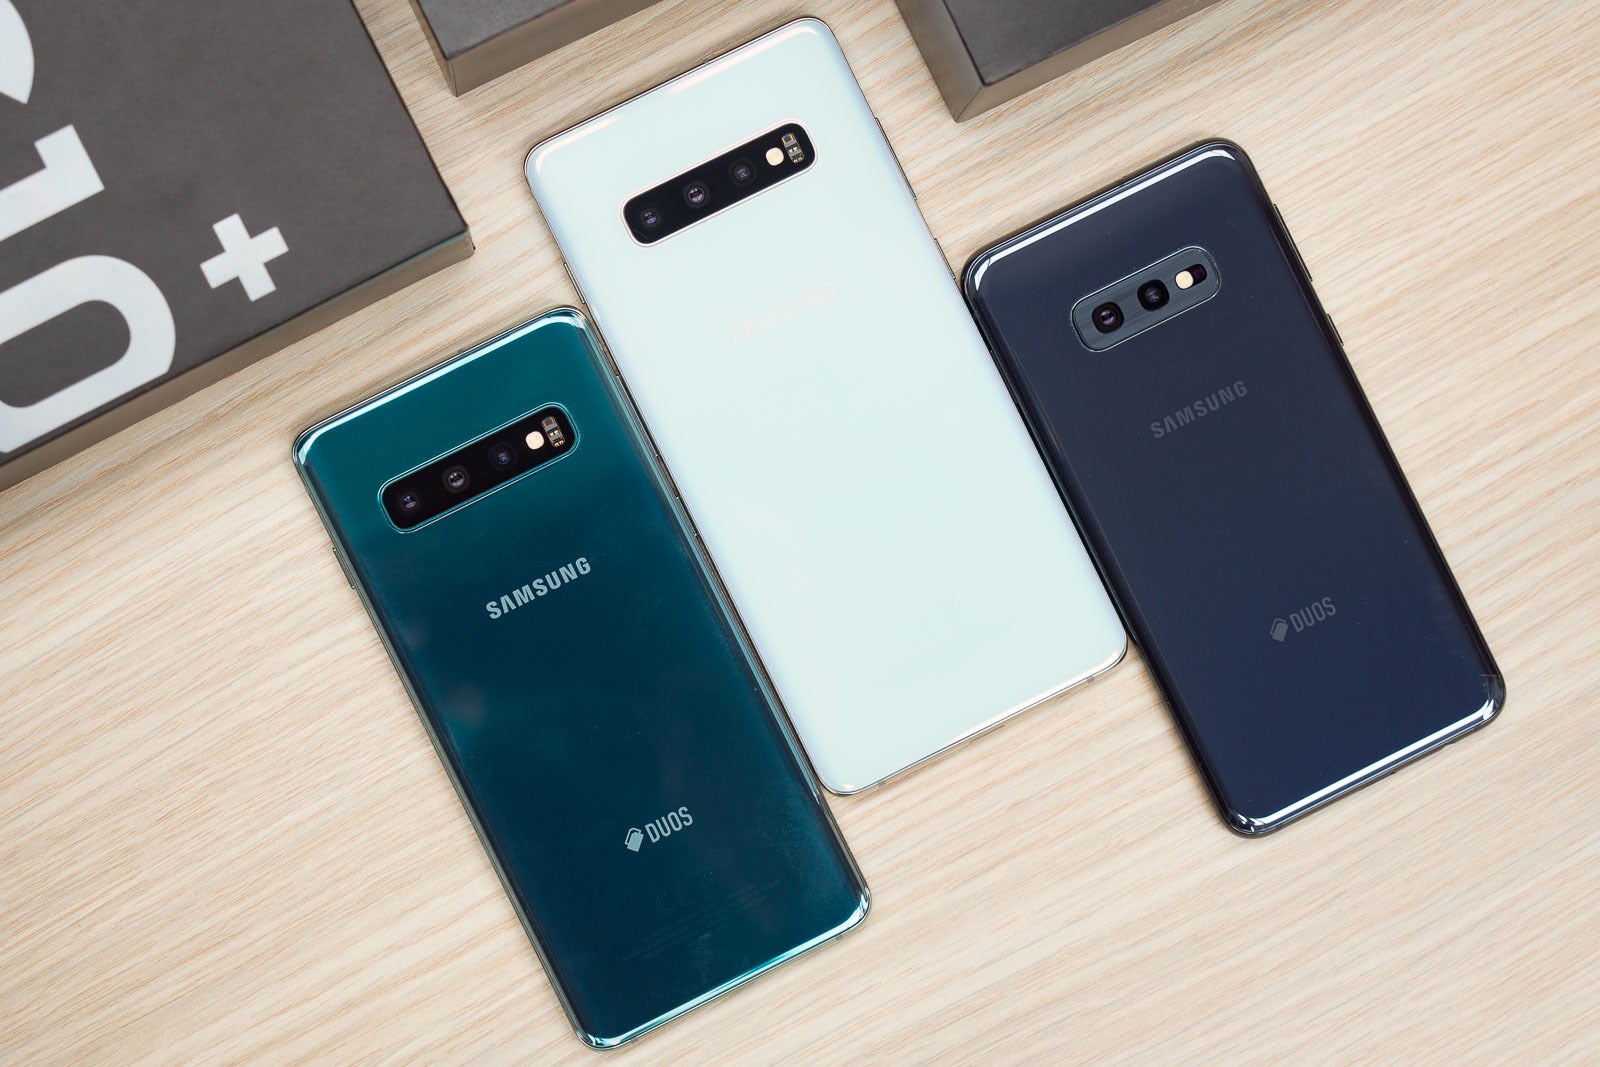 Samsung's Galaxy S10 series is powered by the speedier Snapdragon 855 - Samsung Galaxy A90 tipped to sport huge display and powerful processor